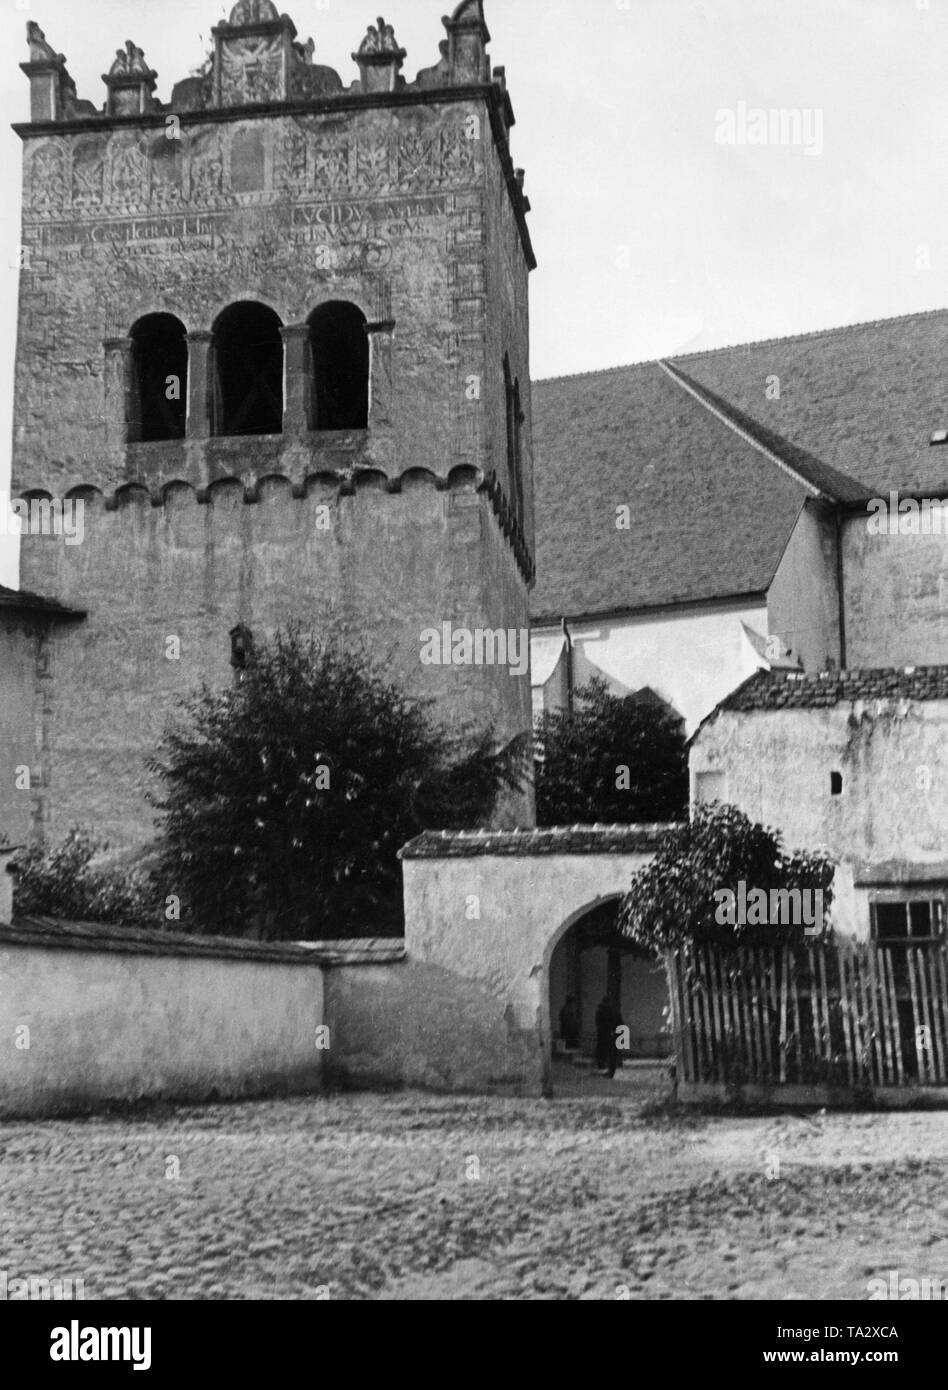 Church in a village in the Slovak region of Spis. In March 1939, the Slovak State became independent on the command of Adolf Hitler. The scene is from the Tobis documentary 'Zips'. Stock Photo